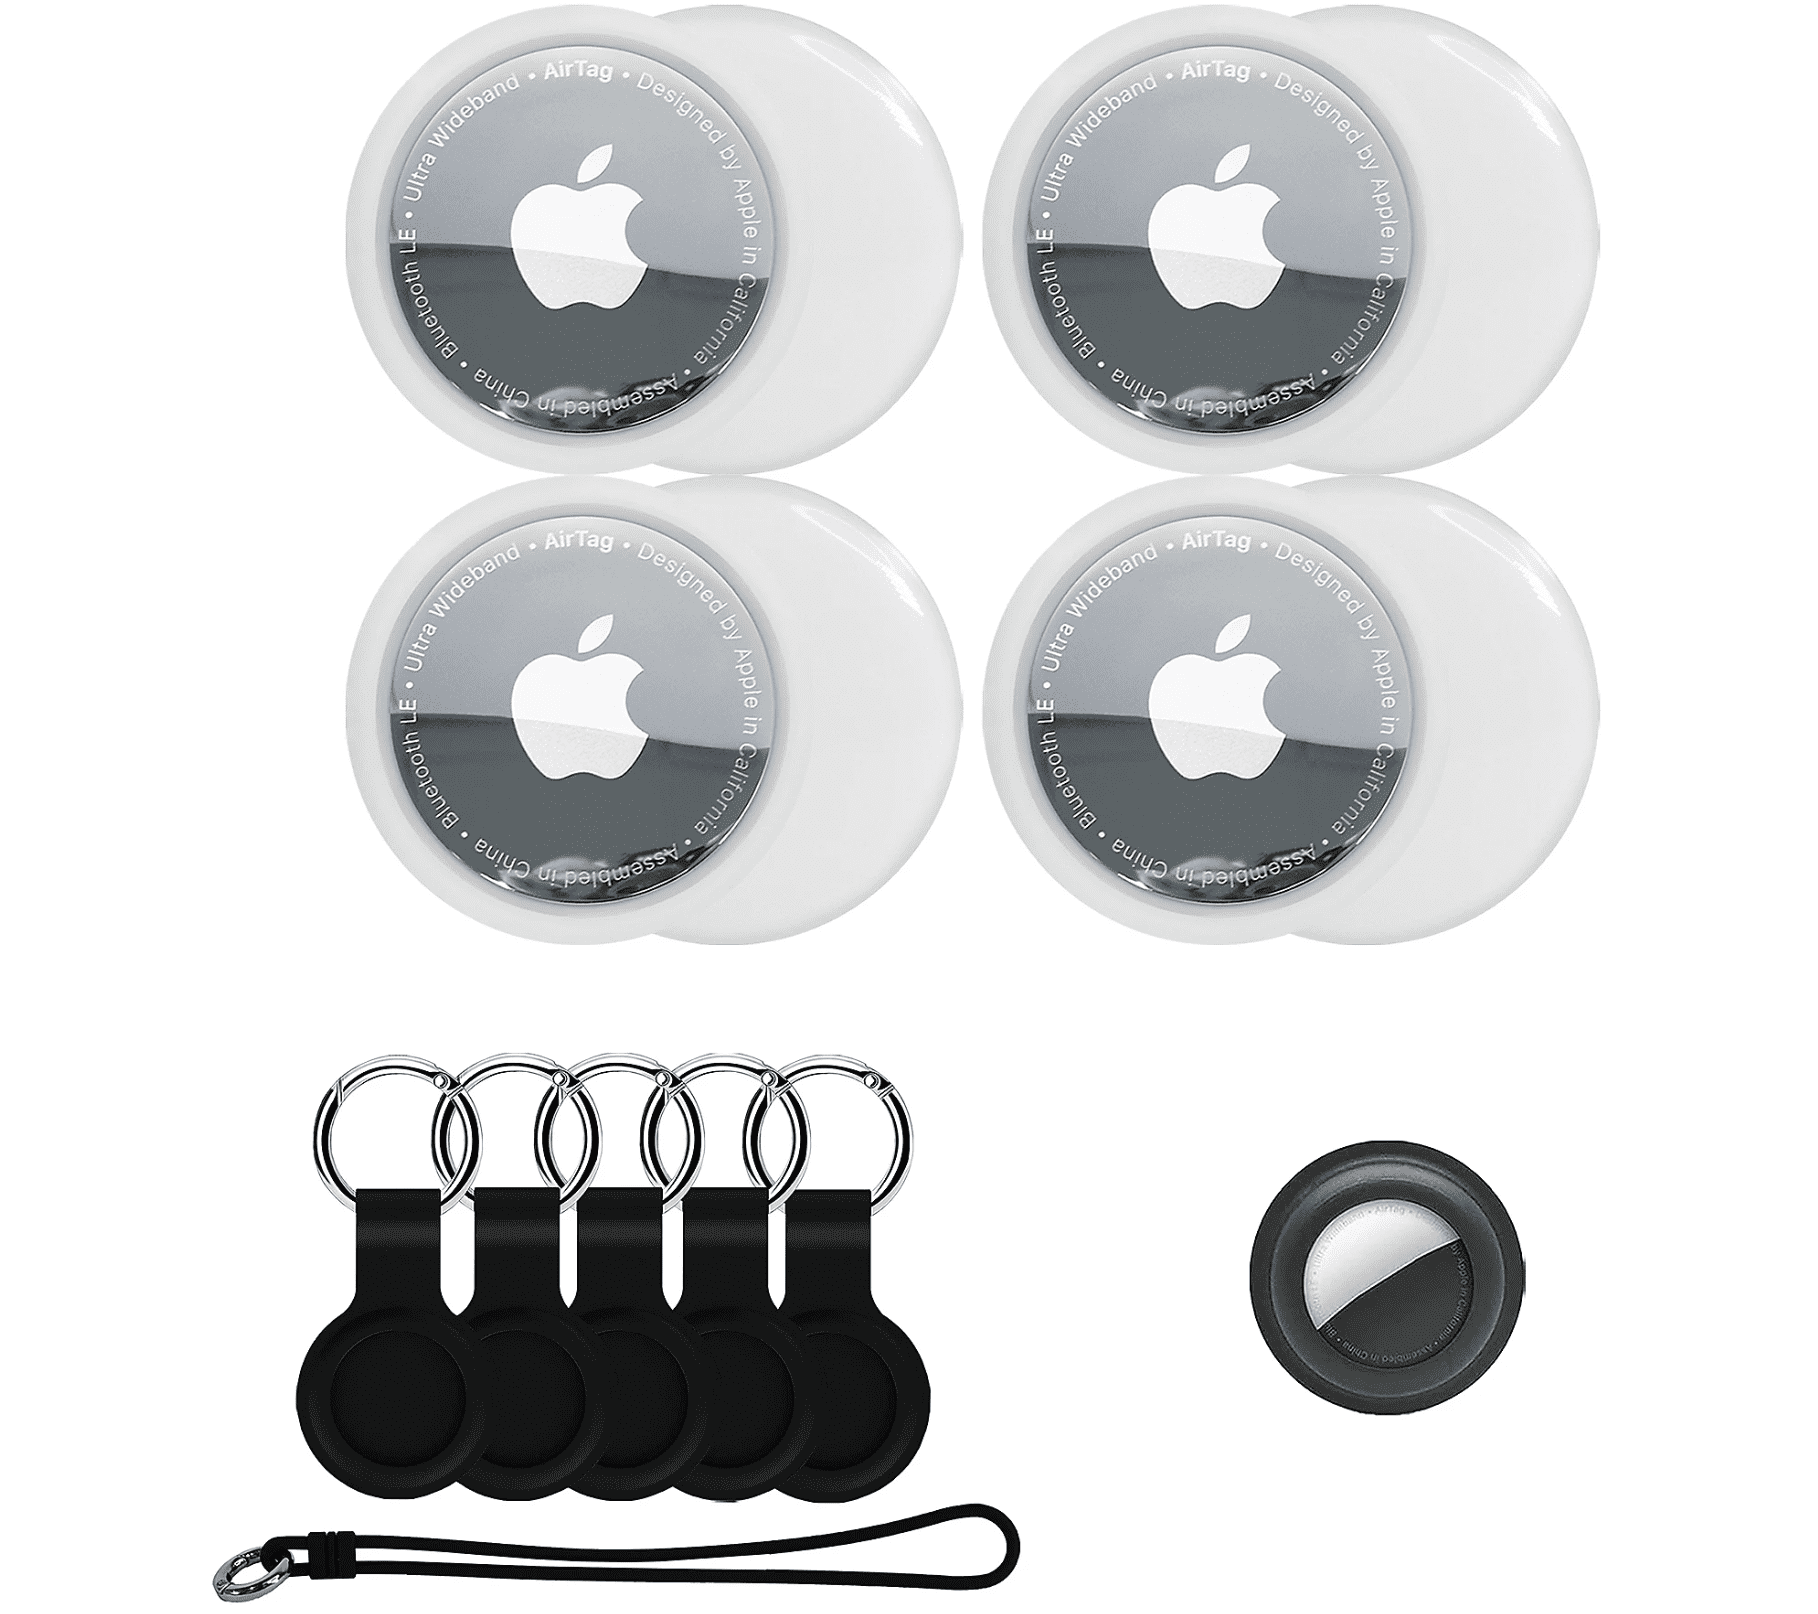 deal: Get 4 Apple AirTags for less than $90 at